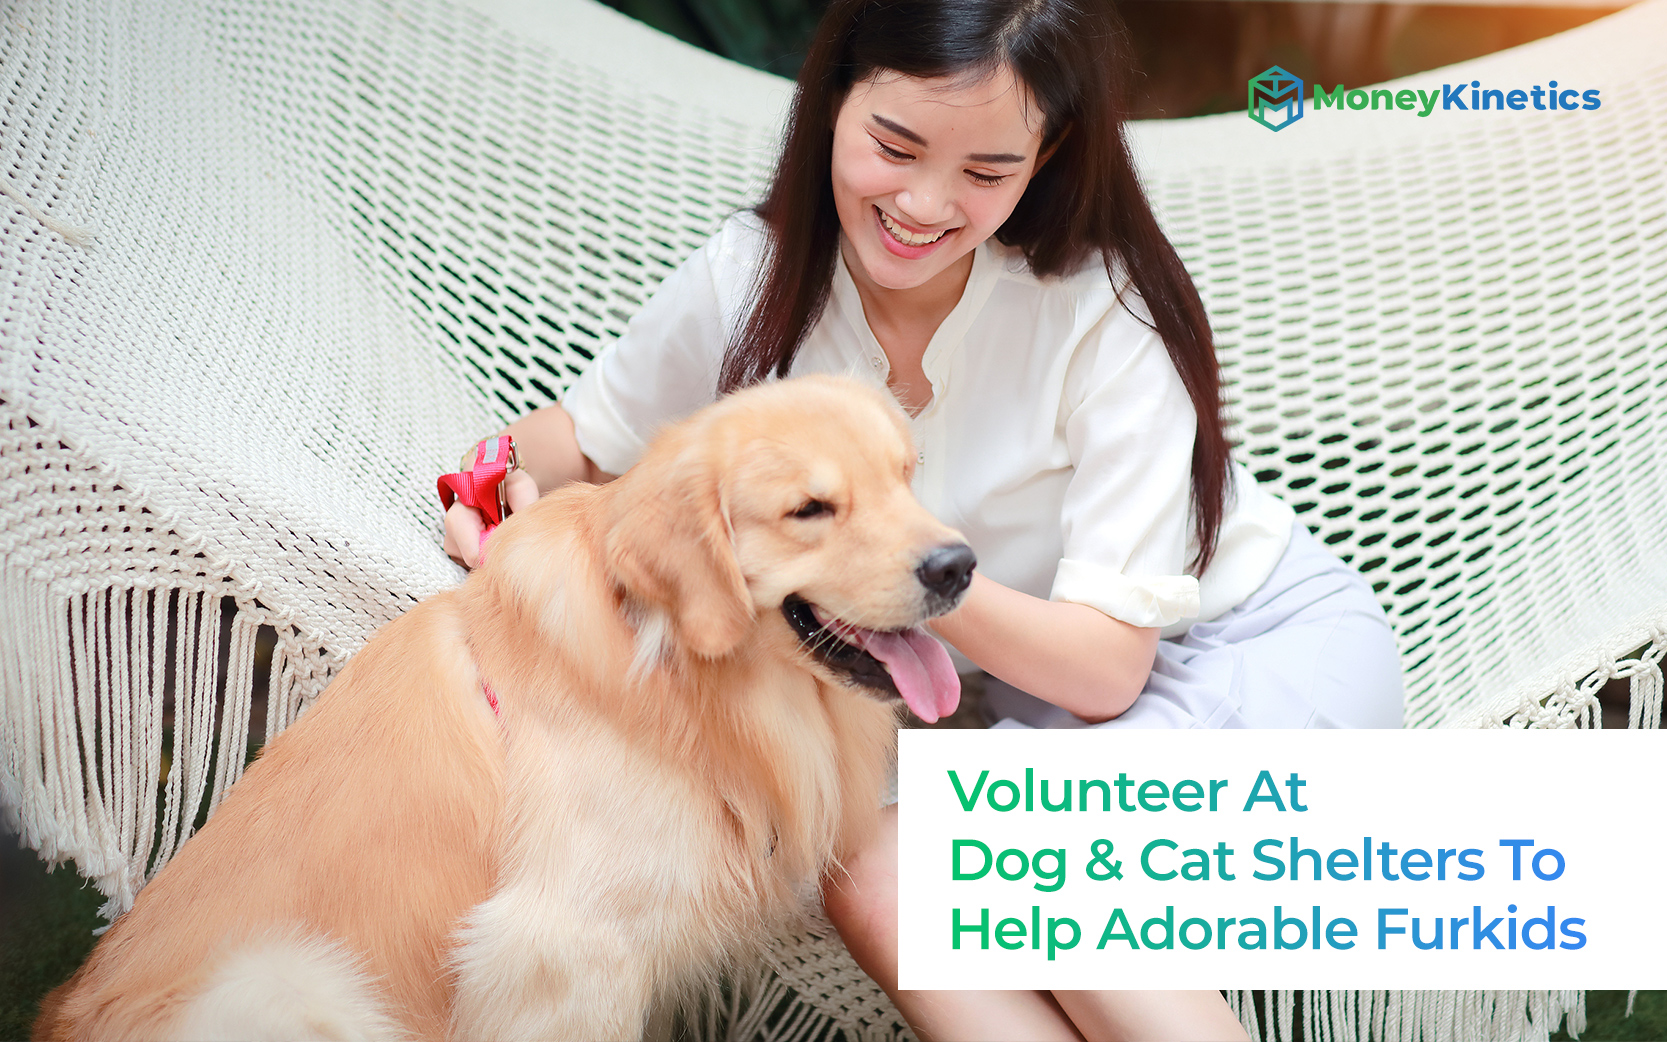 Dog-And-Cat-Shelters-To-Volunteer-At-To-Help-Furkids-In-Singapore